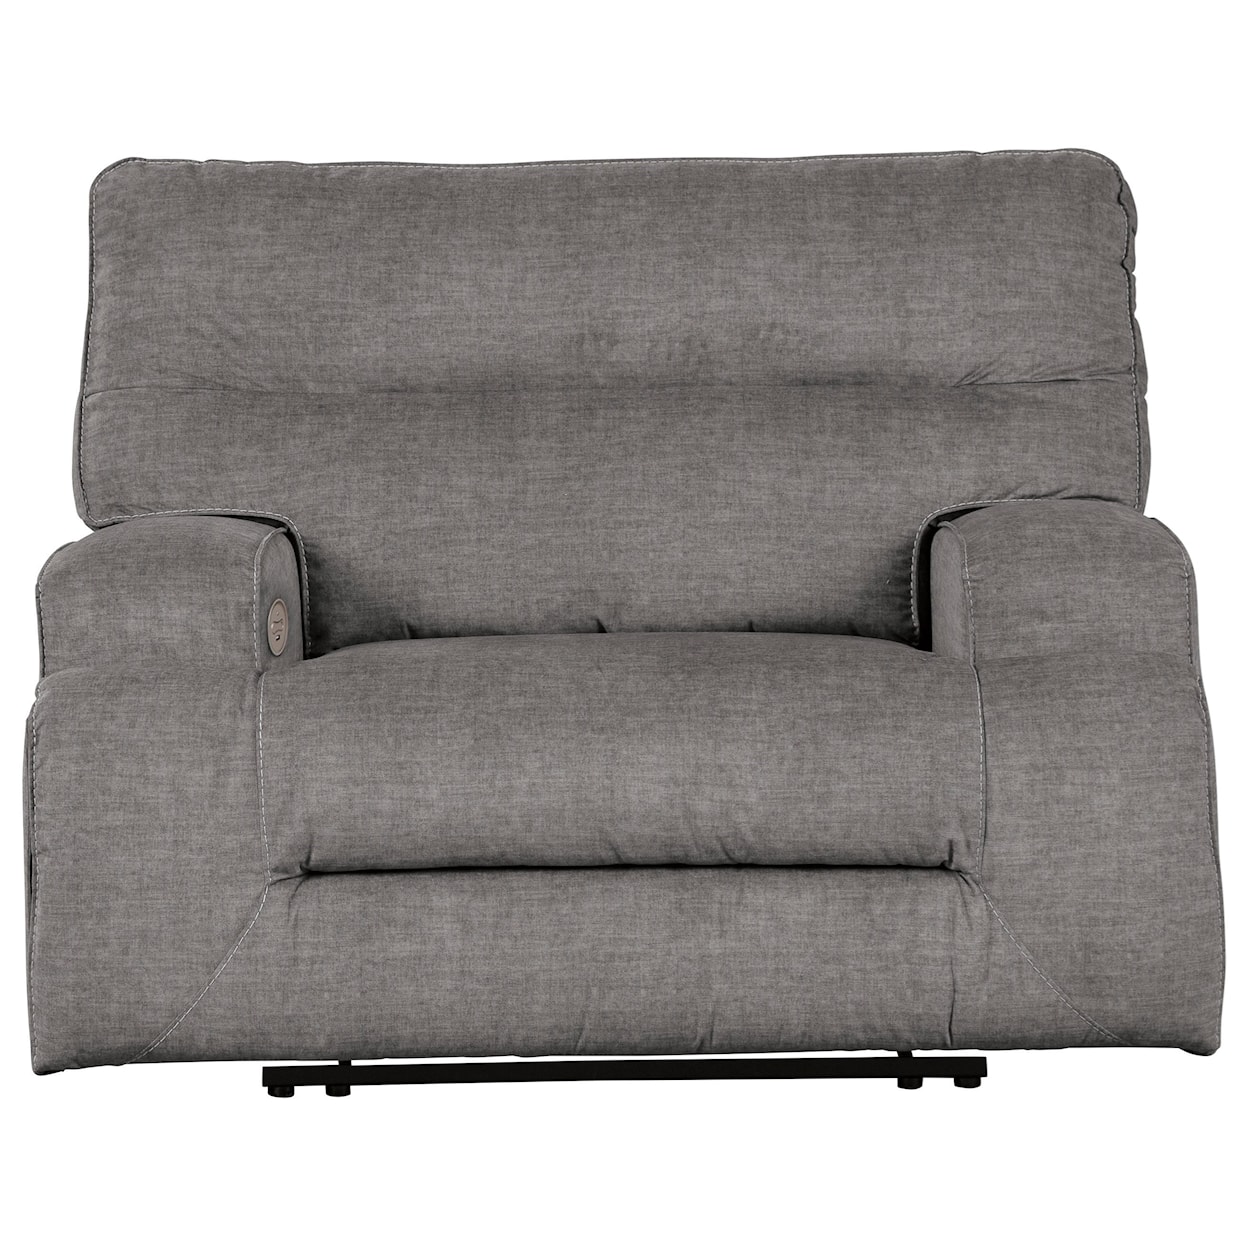 Benchcraft Coombs Wide Seat Power Recliner